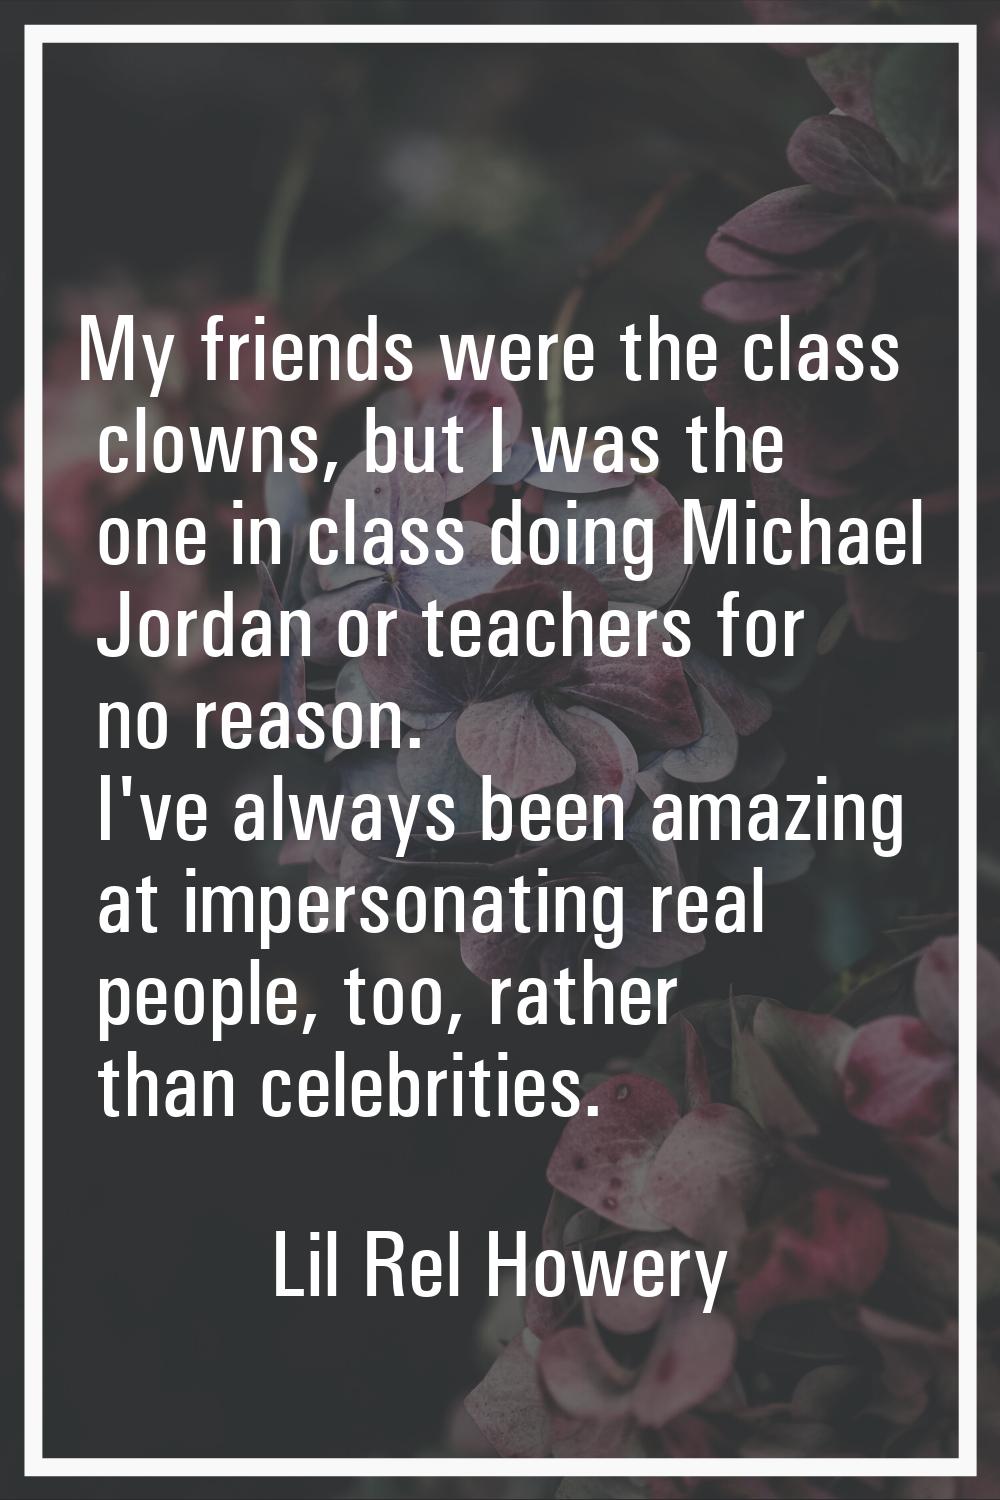 My friends were the class clowns, but I was the one in class doing Michael Jordan or teachers for n